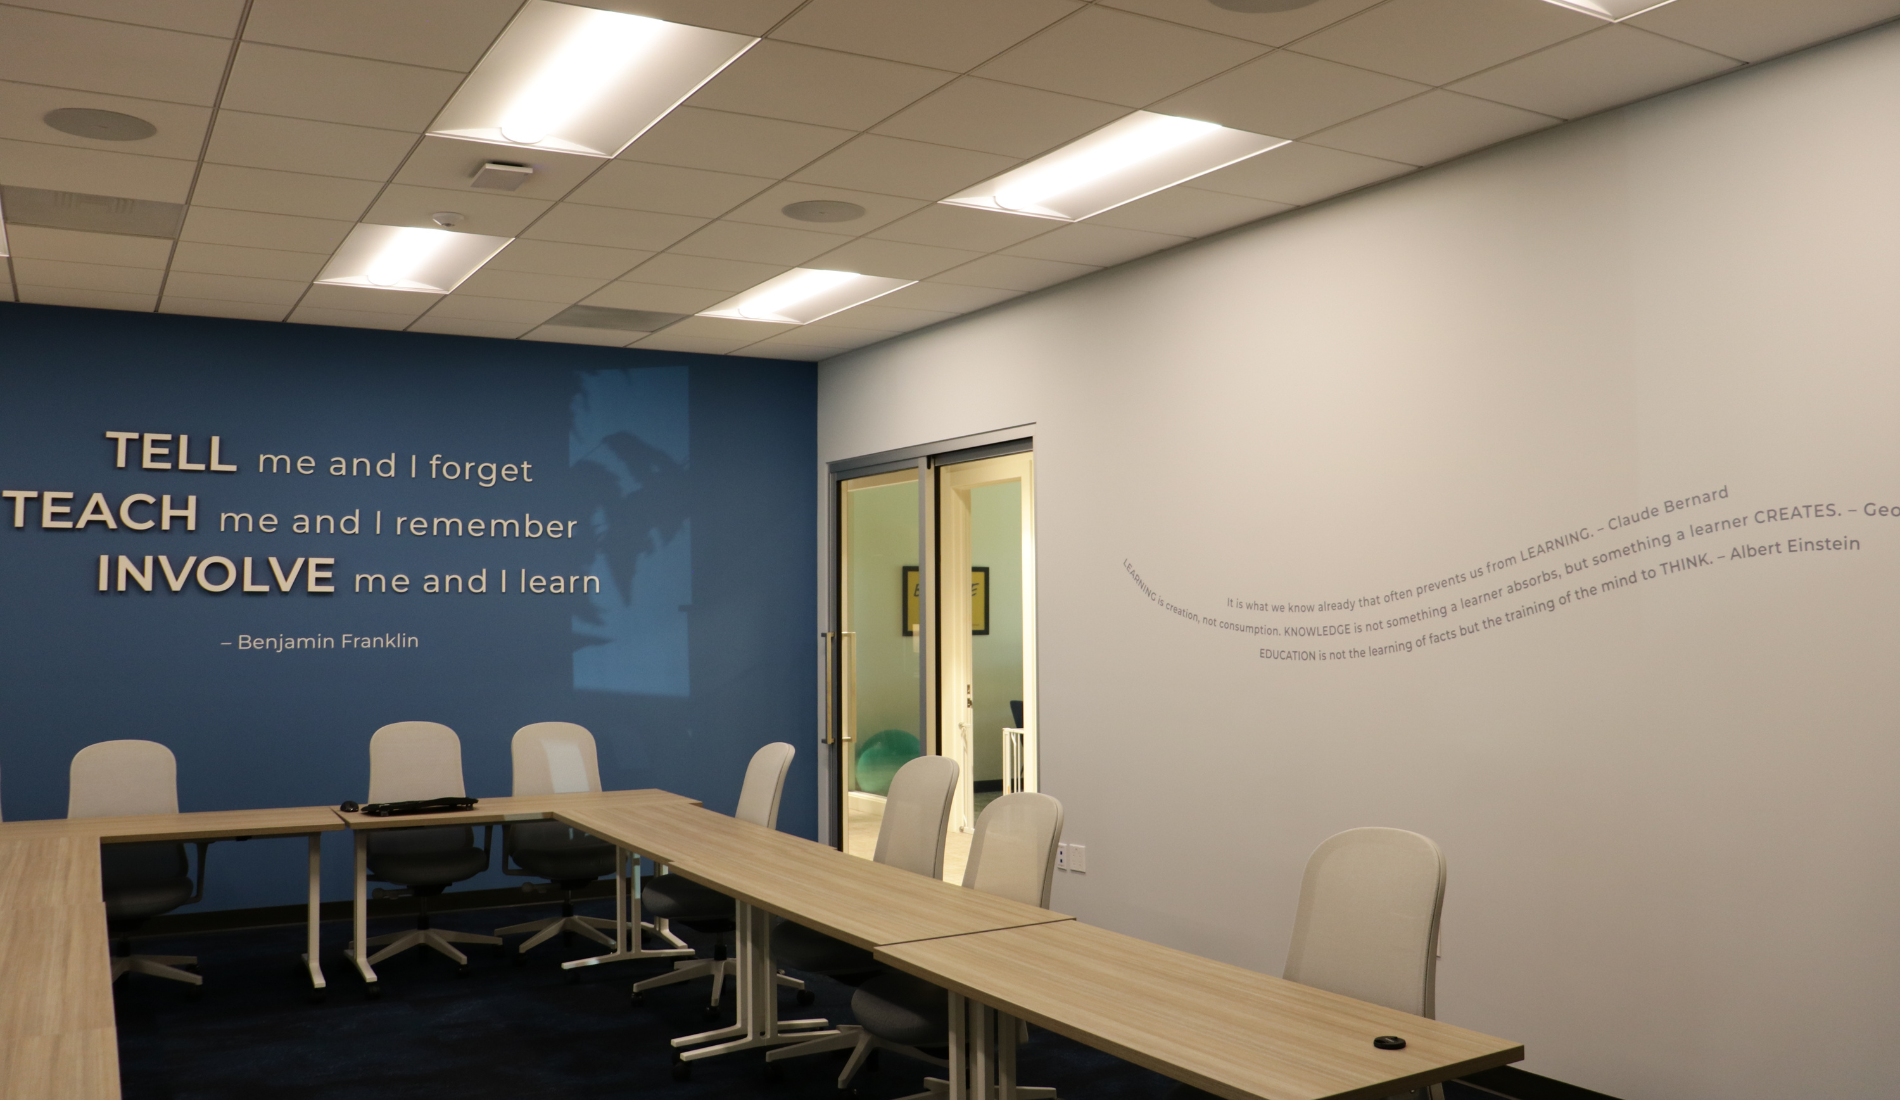 San Diego interior design conference room with seating, table and decorative wall